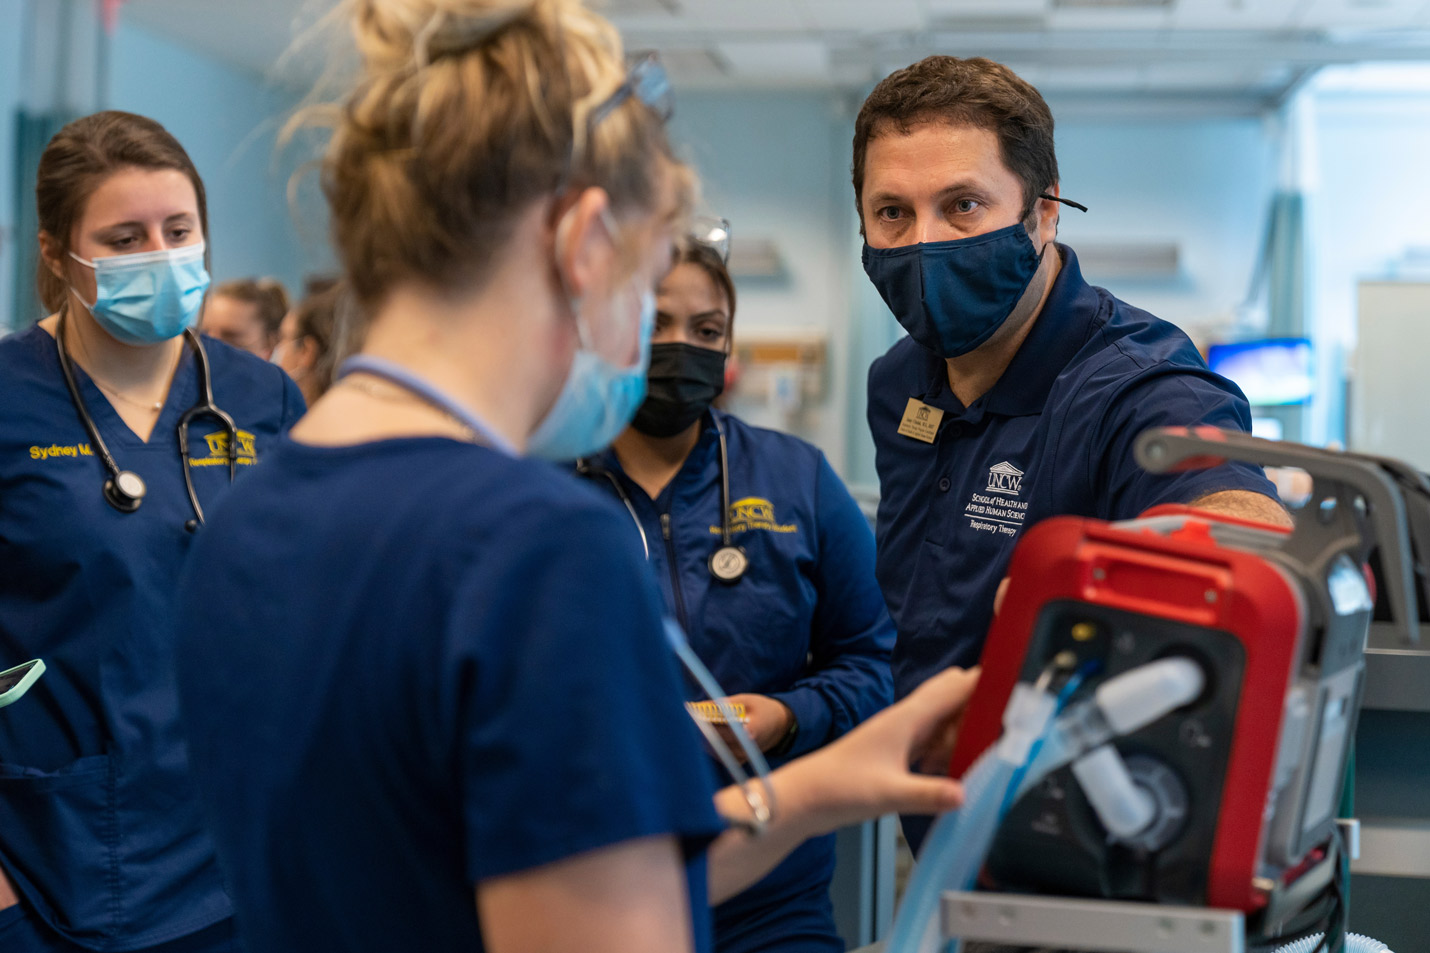 A respiratory therapy professor observes students while they practice with equipment.